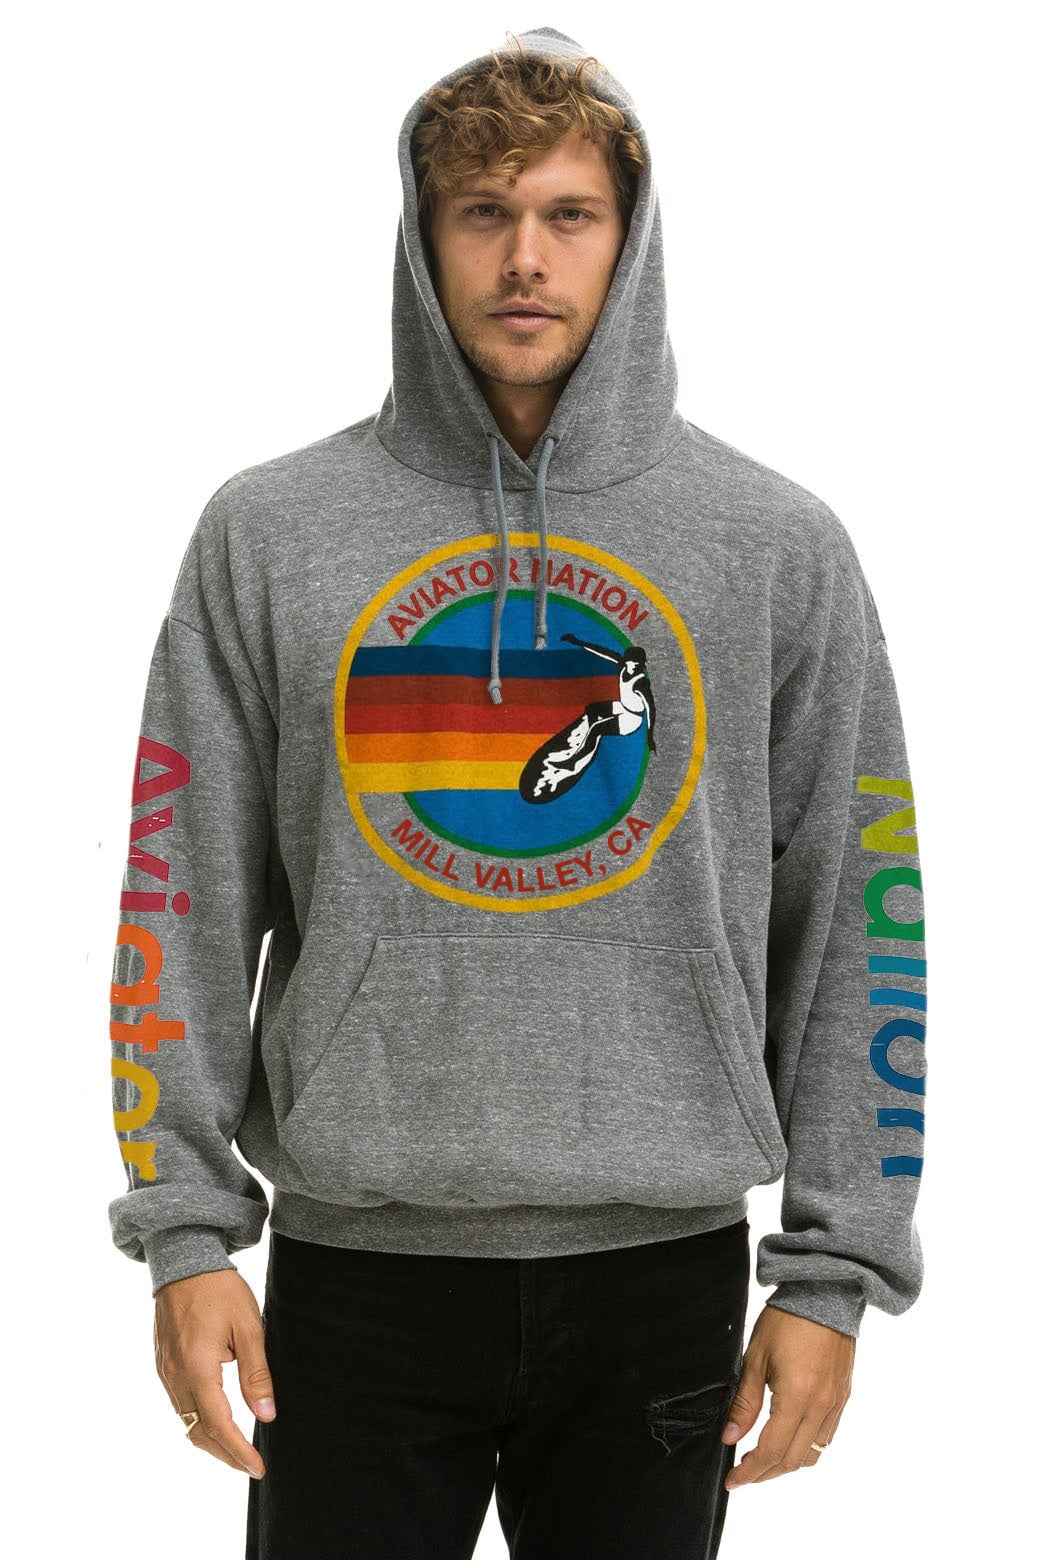 AVIATOR NATION MILL VALLEY RELAXED PULLOVER HOODIE - HEATHER GREY Hoodie Aviator Nation 